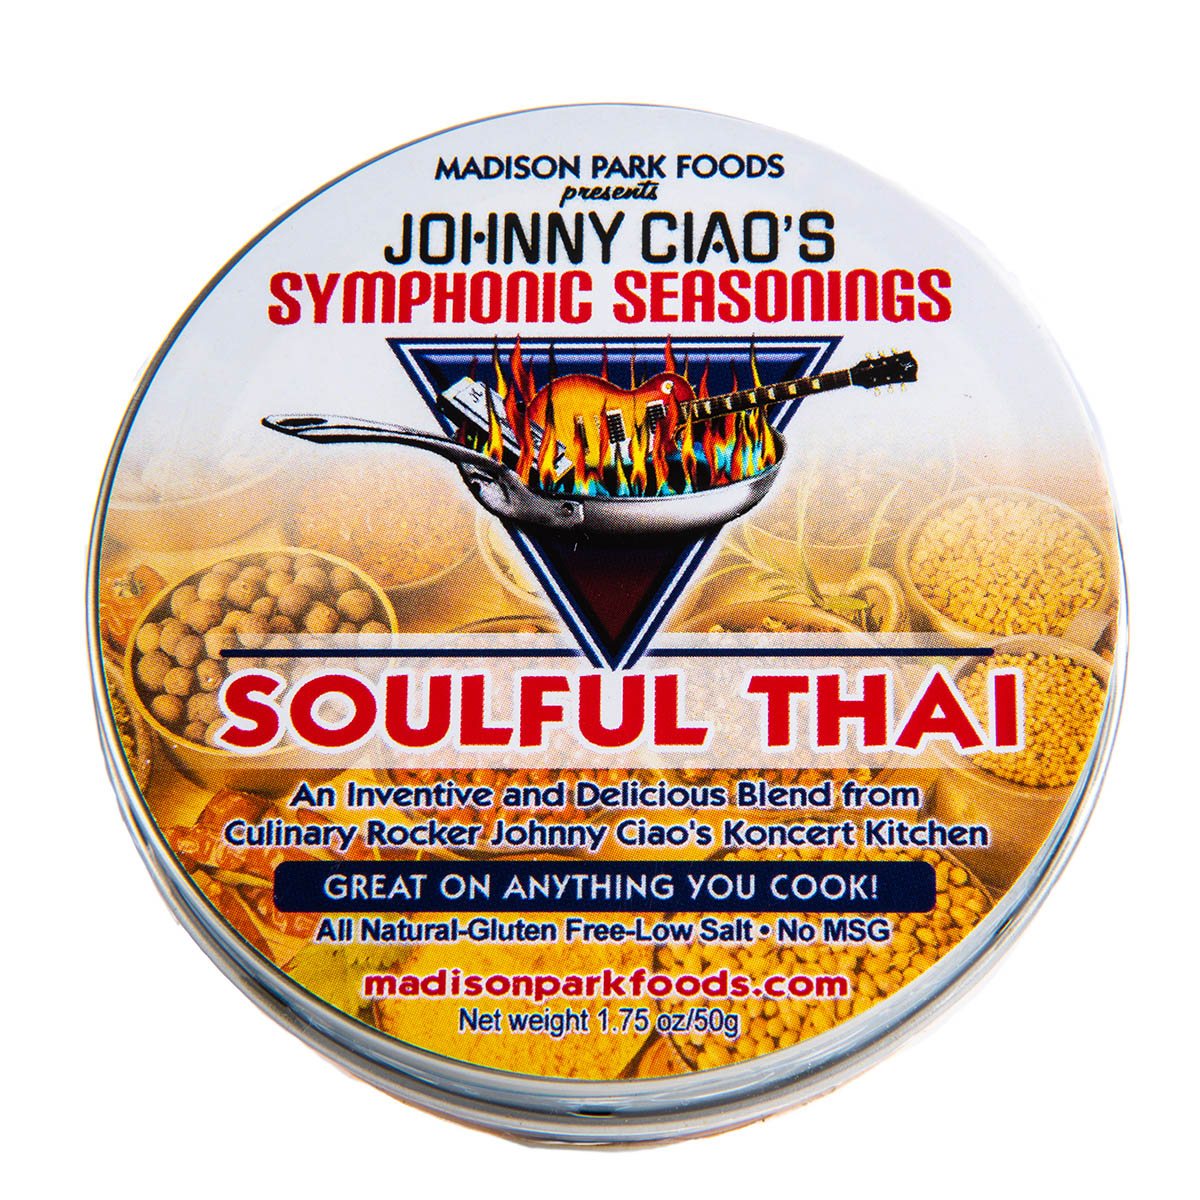 Johnny Ciao's Soulful Thai - Madison Park Foods